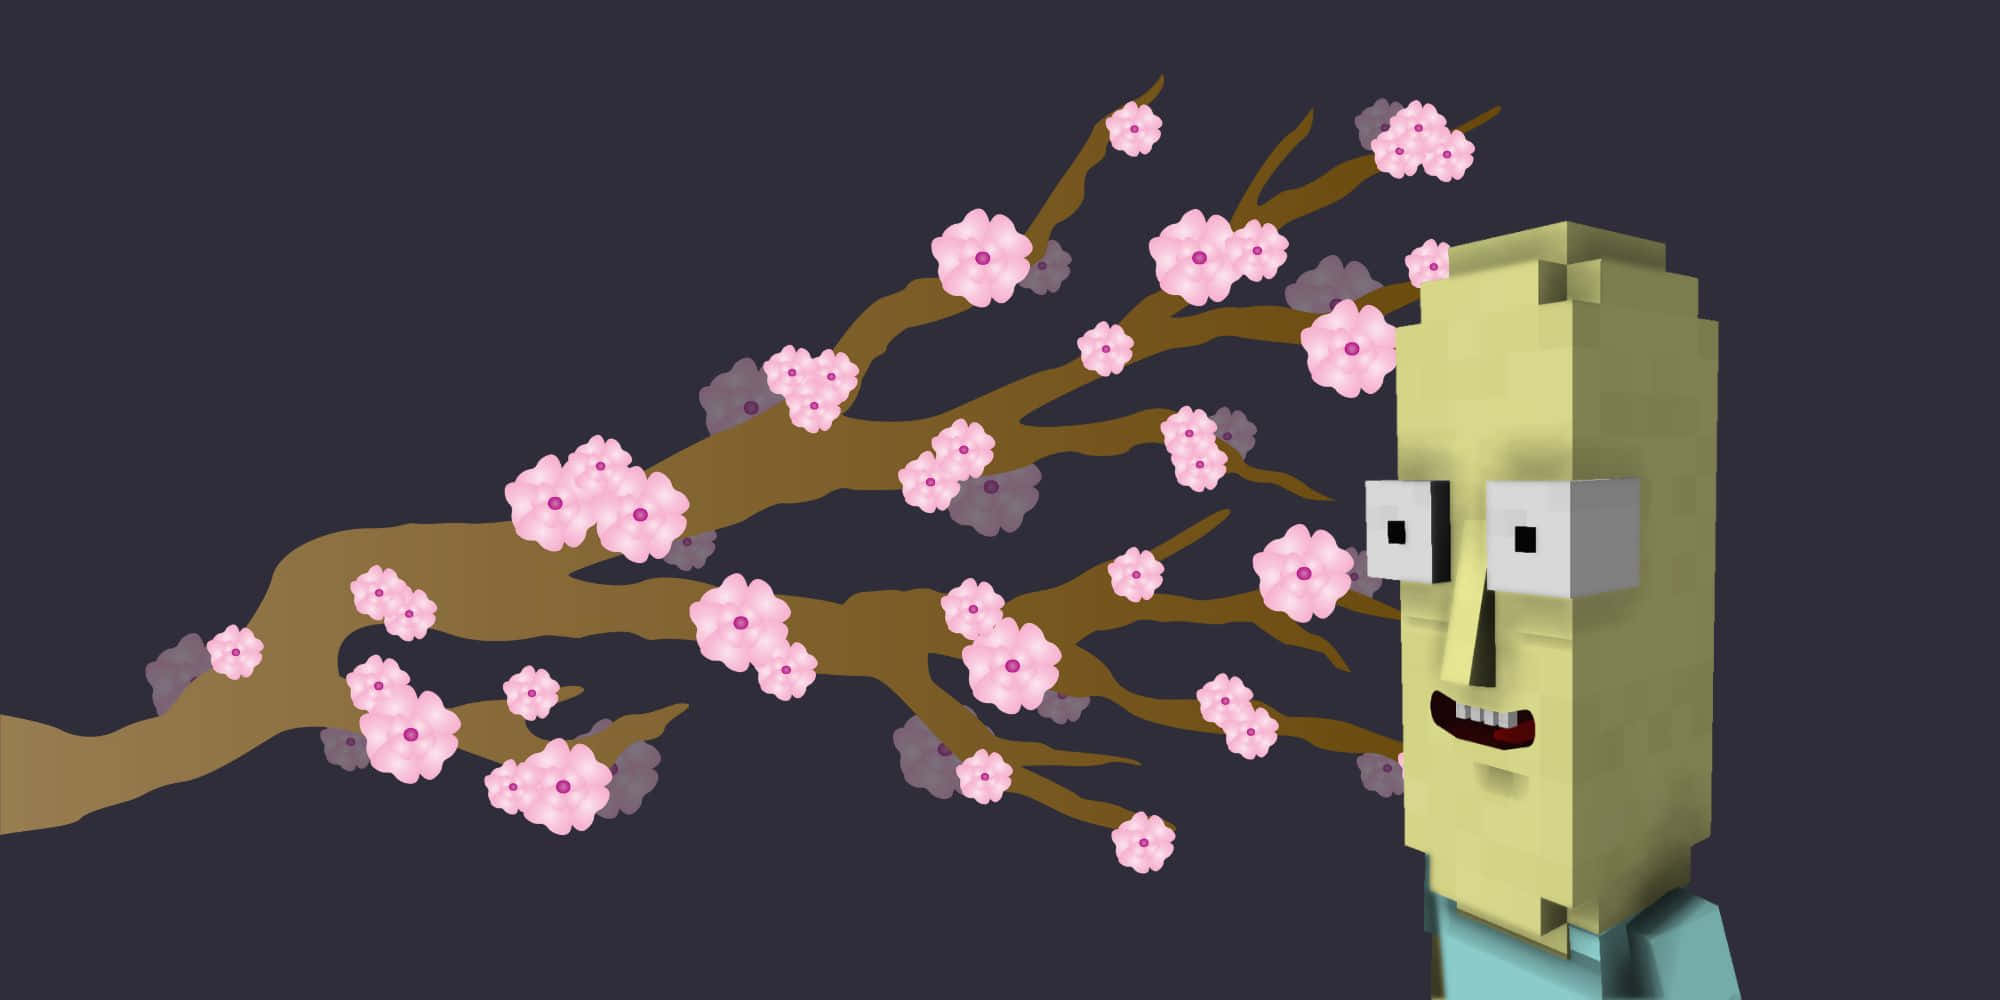 Mr. Poopybutthole in his iconic joyful pose Wallpaper